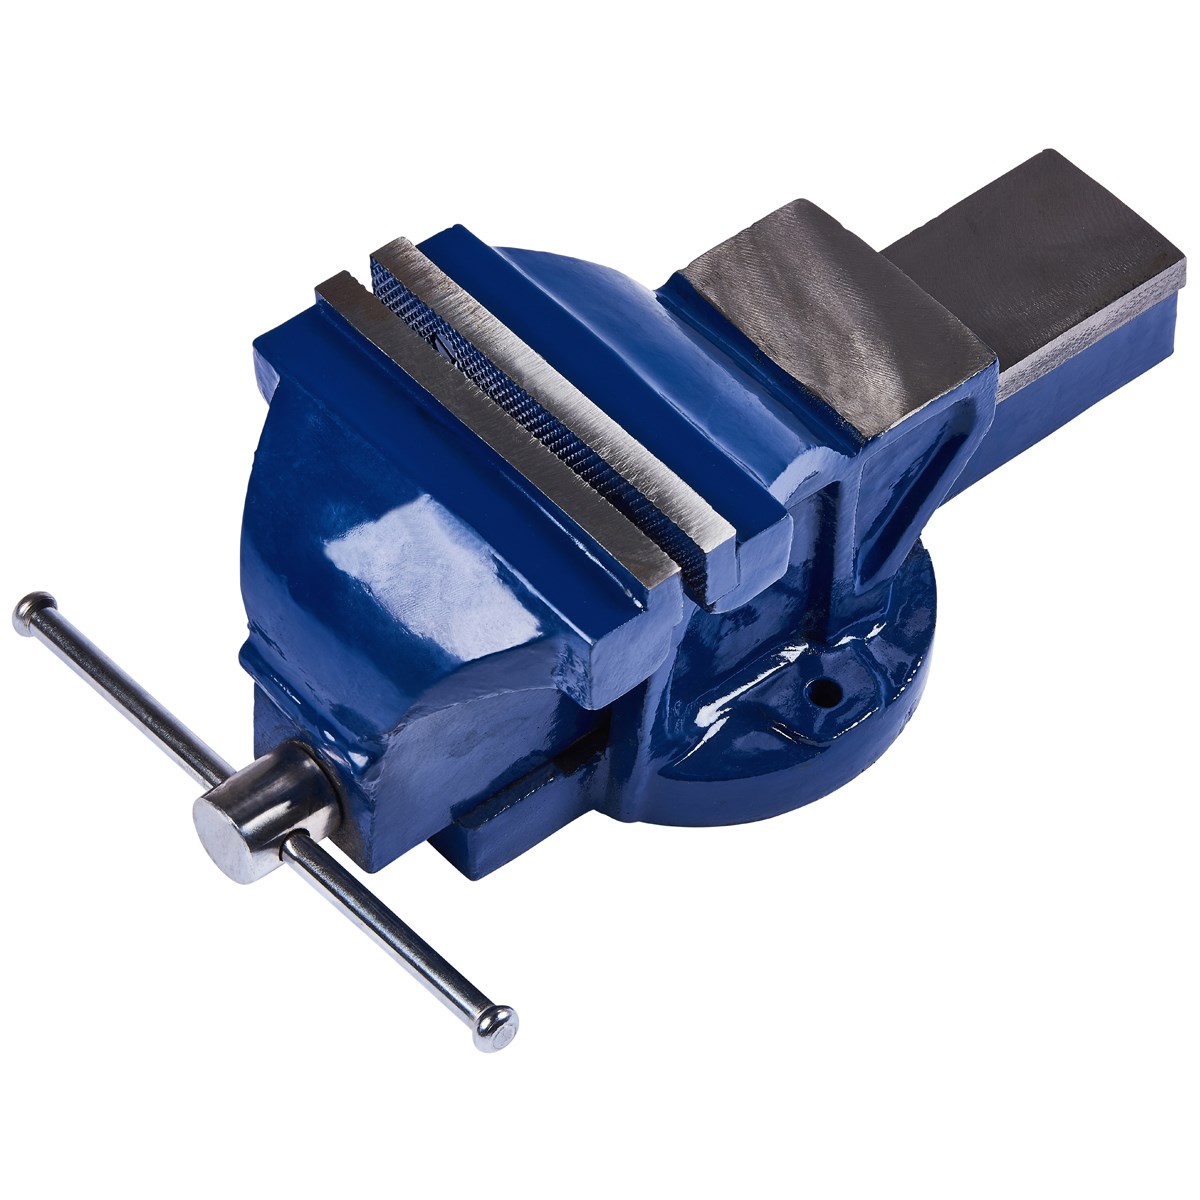 Heavy Duty 6" Professional Unbreakable Fixed Bench Vice TBT3316 